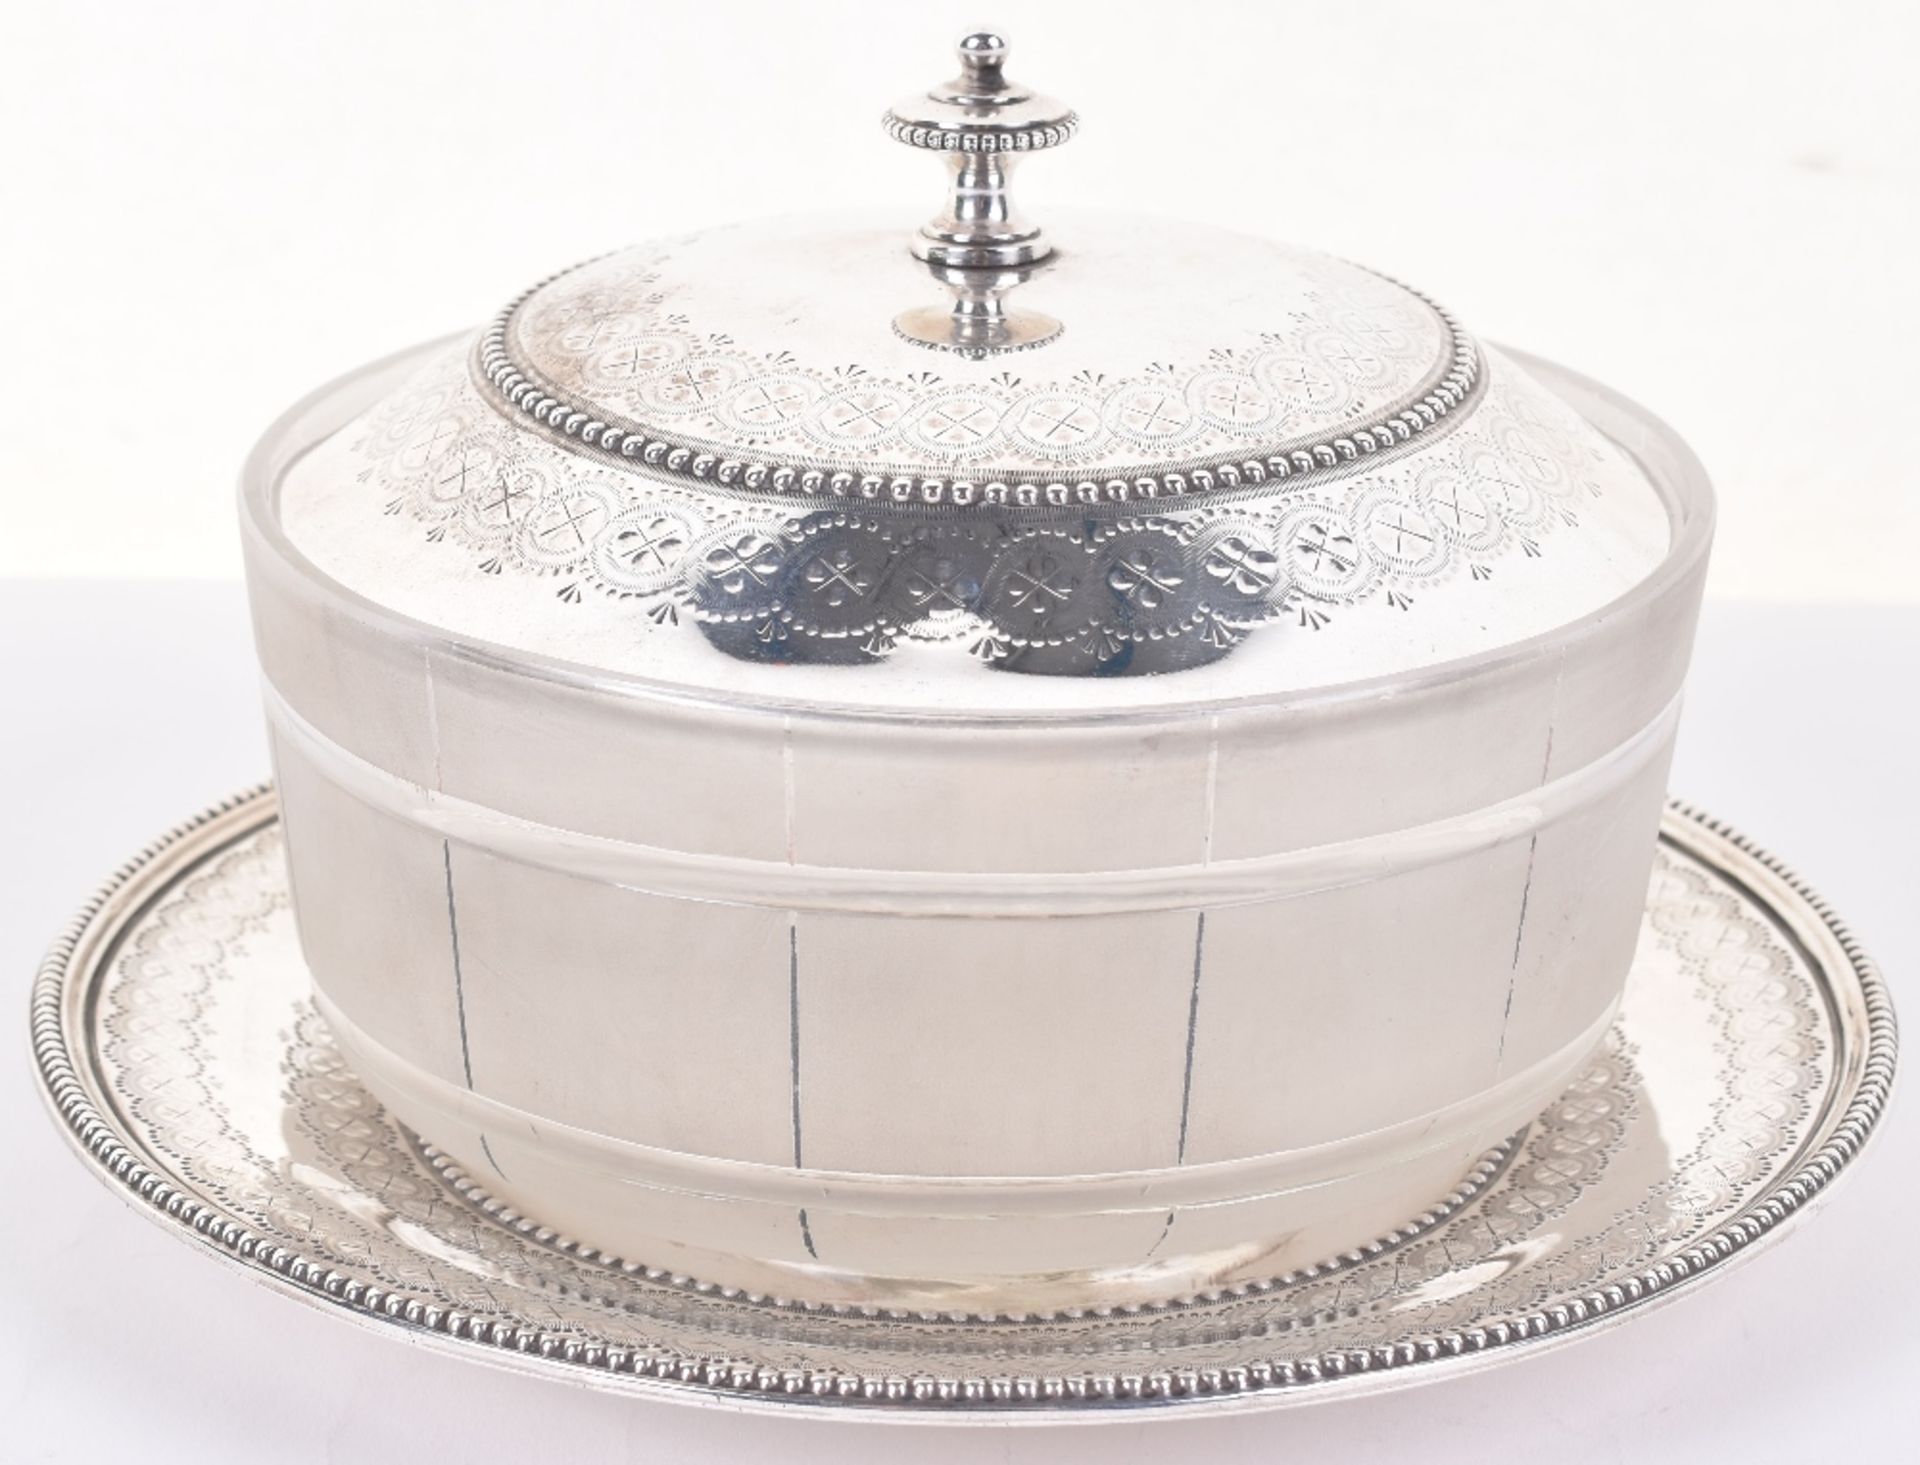 A Victorian silver and glass butter dish or sweet pot and plate, 1880, by Joseph Bradbury and John H